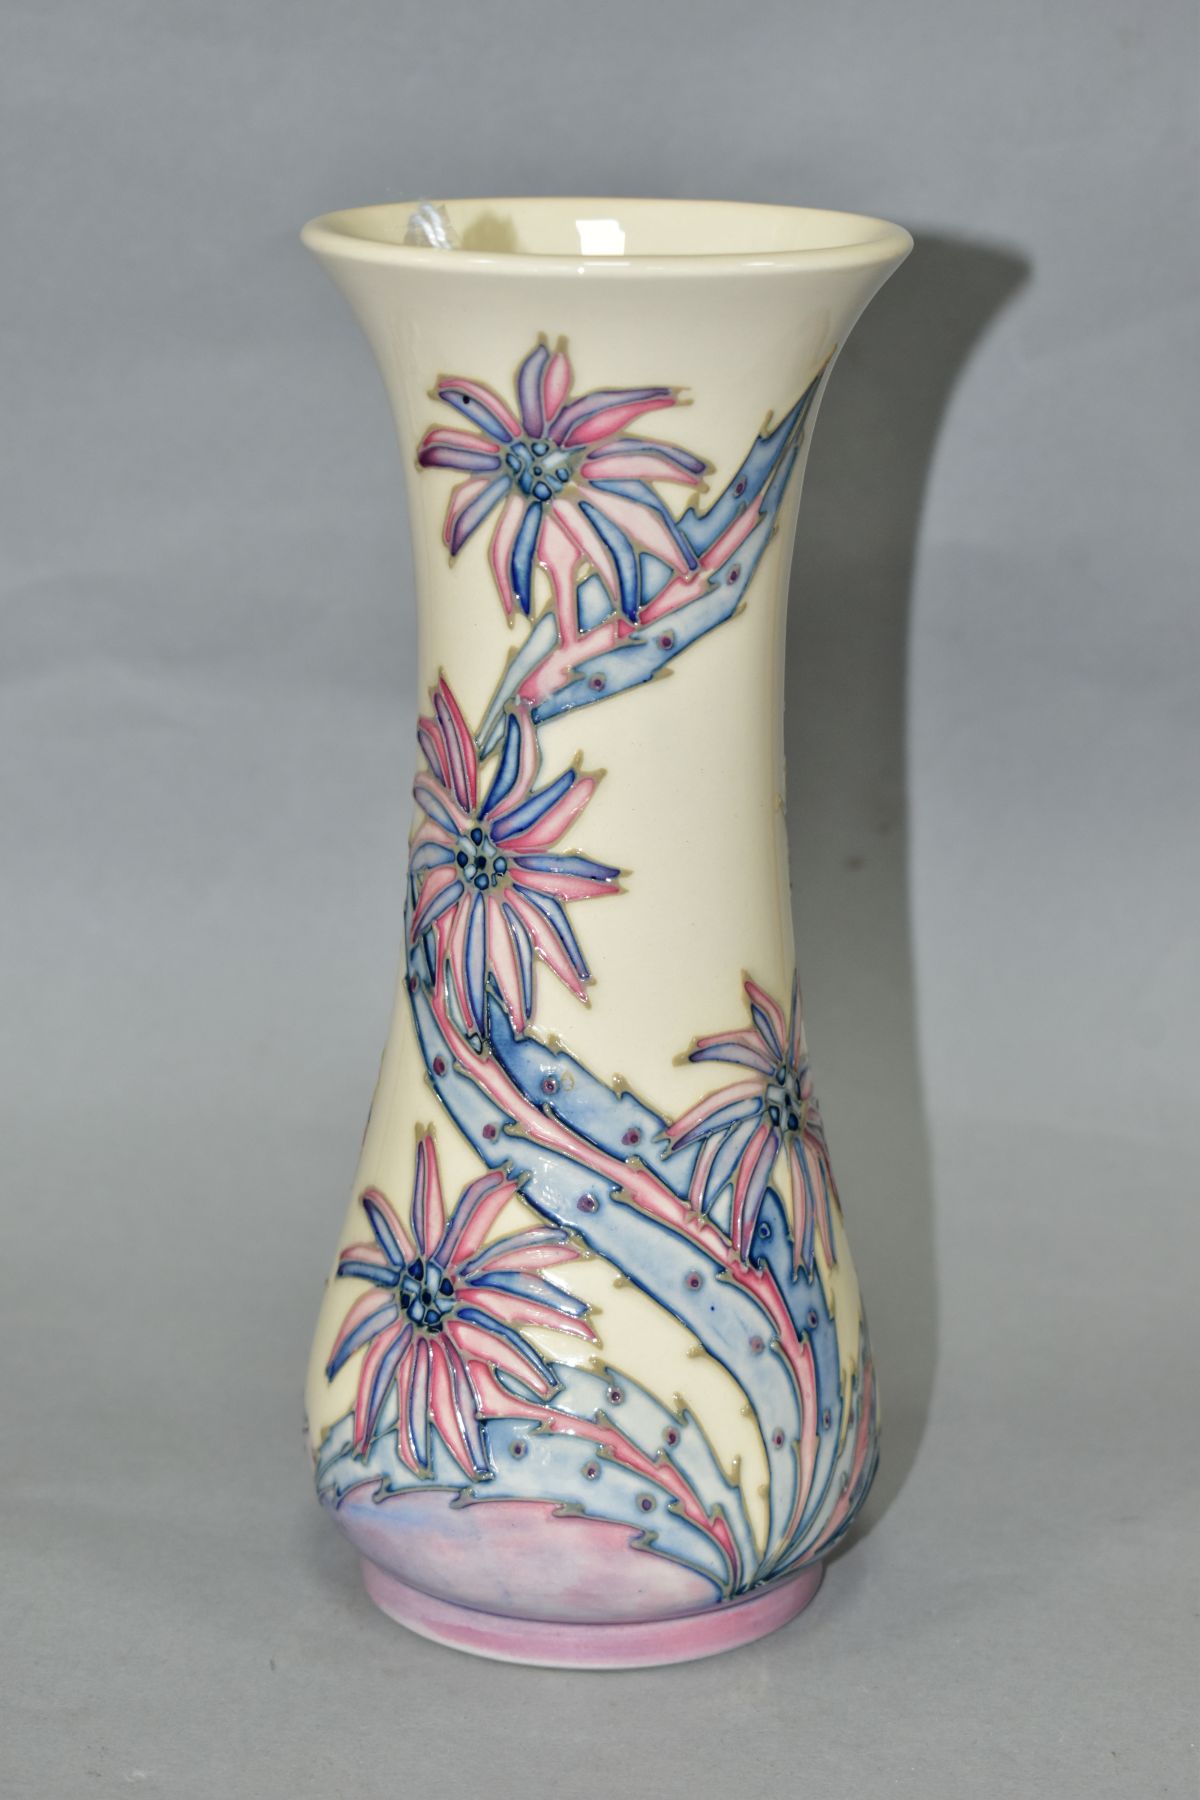 A MOORCROFT POTTERY COLLECTORS CLUB DAISY PATTERN VASE, designed by Sally Tuffin, printed, painted